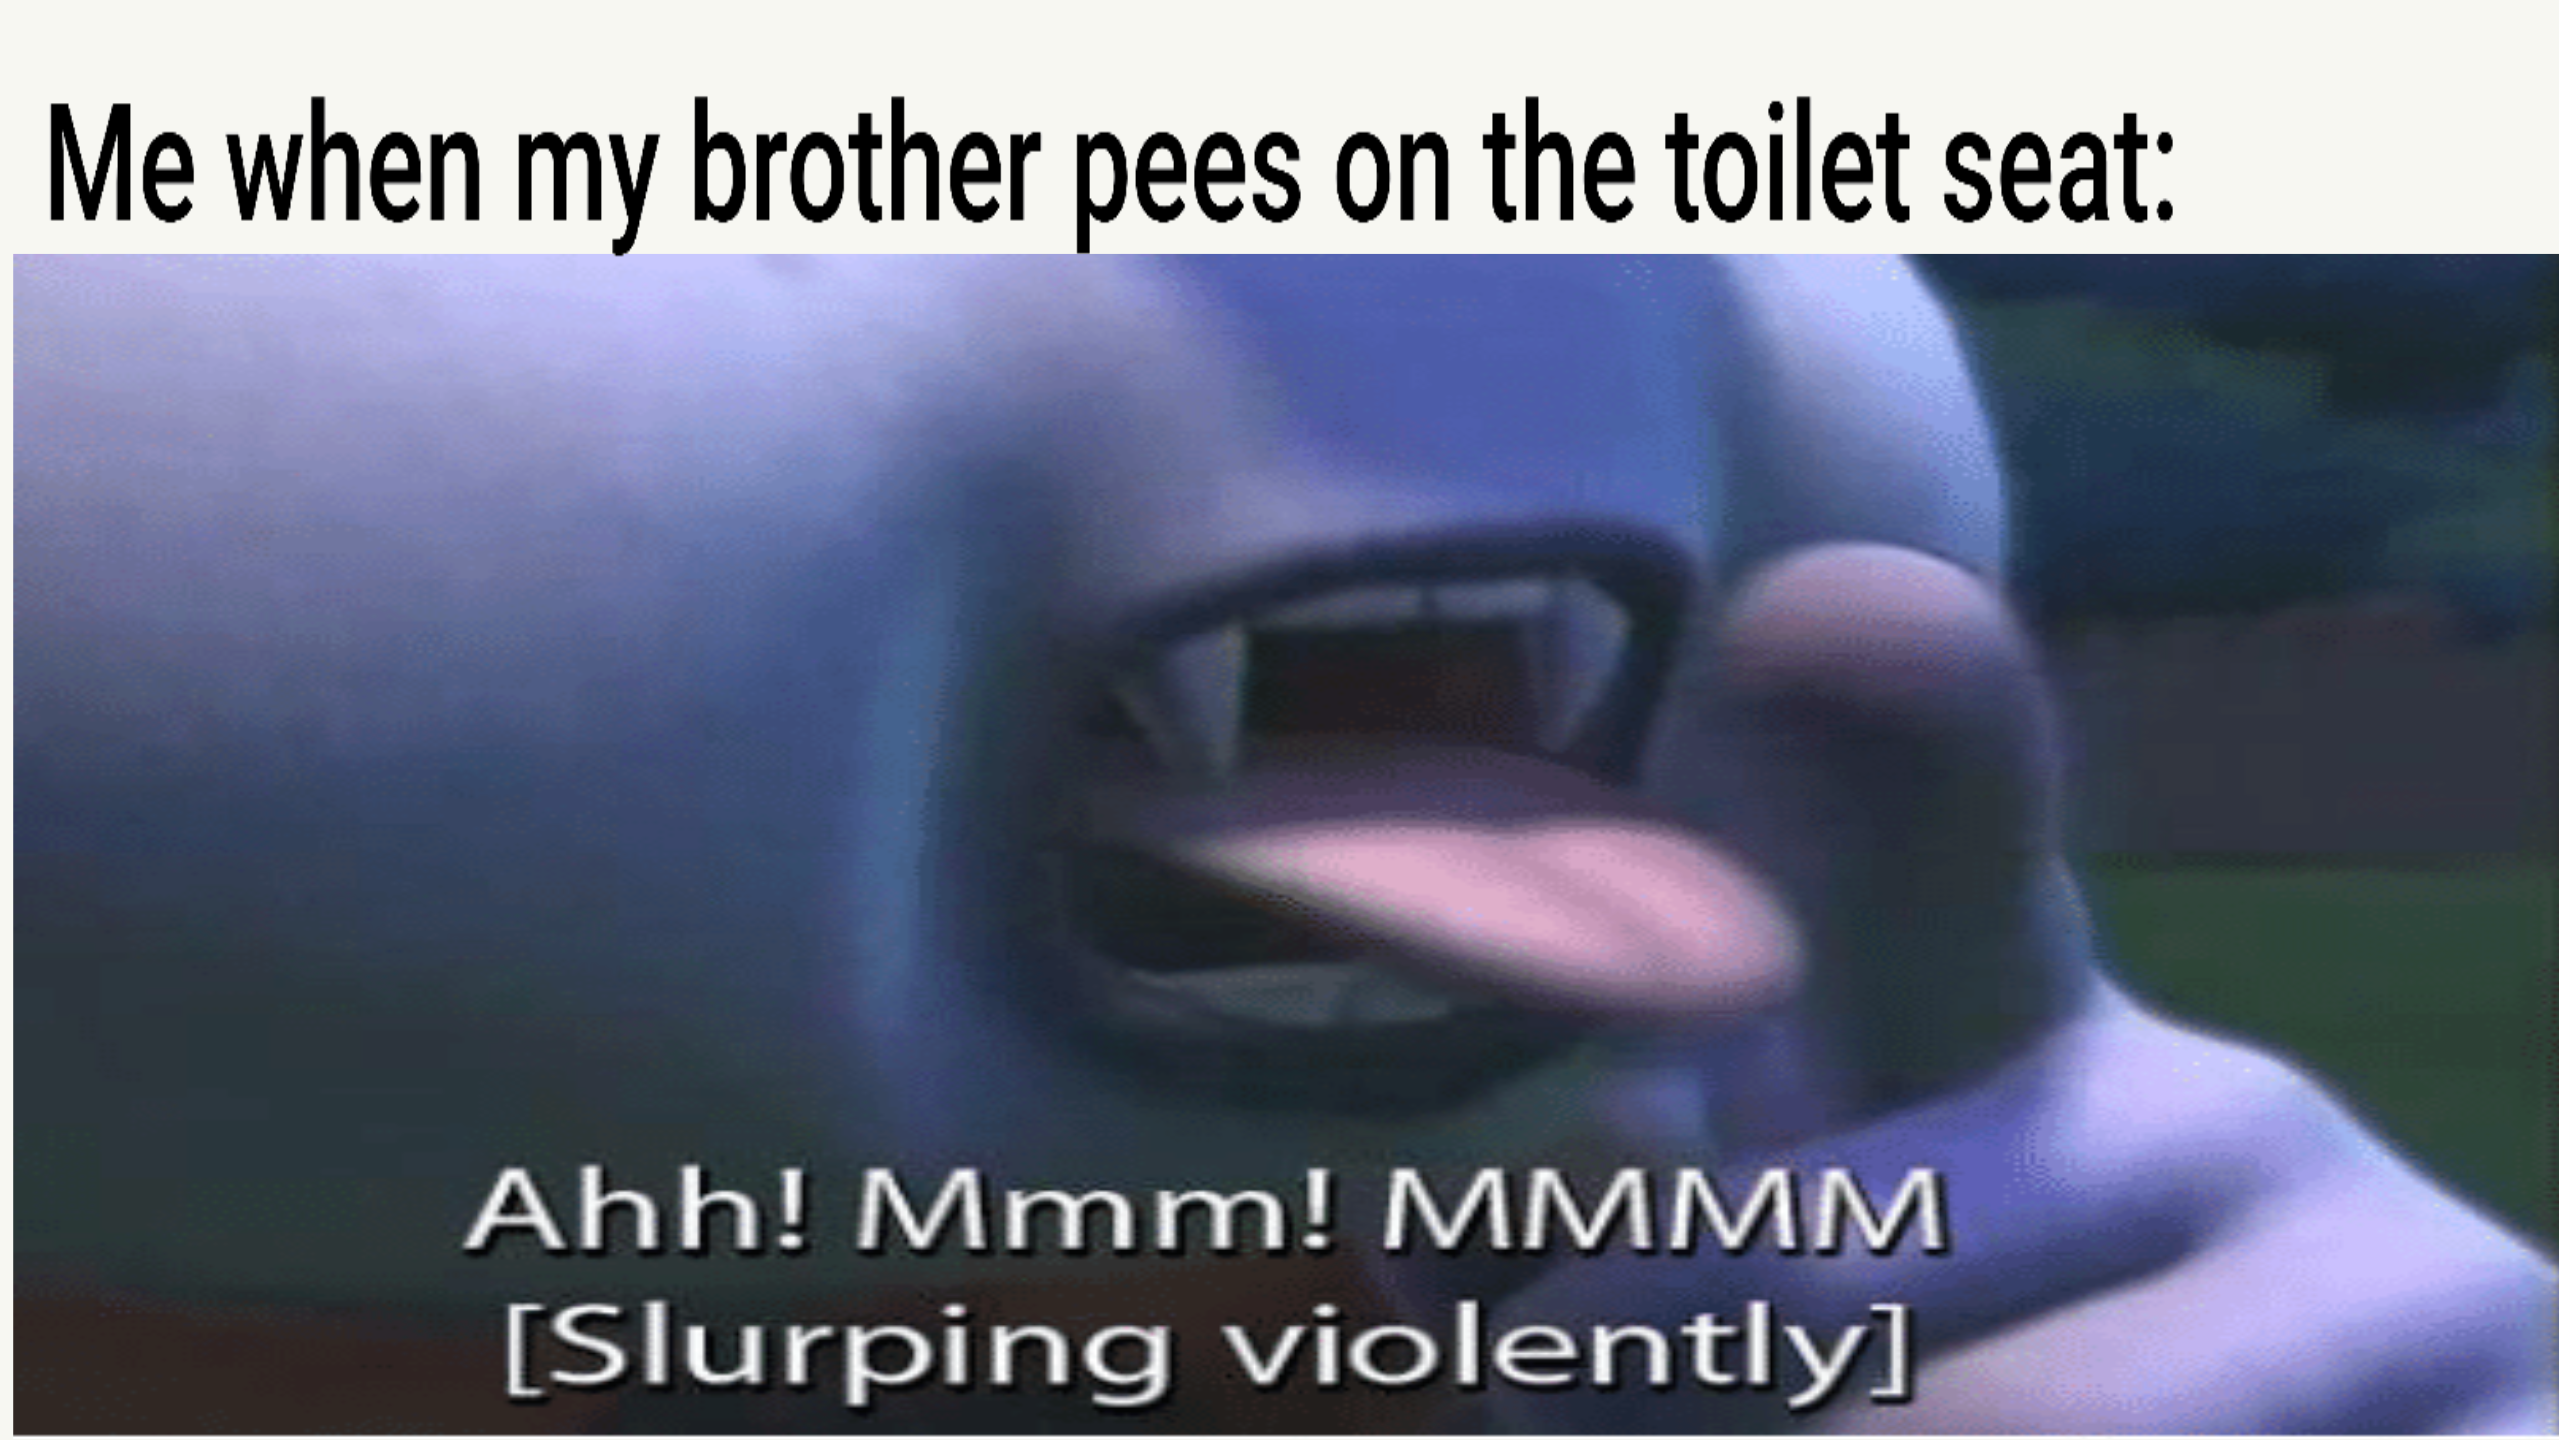 cursed memes - t tilt the screen back - Me when my brother pees on the toilet seat Ahh! Mmm! Mmmm Slurping violently